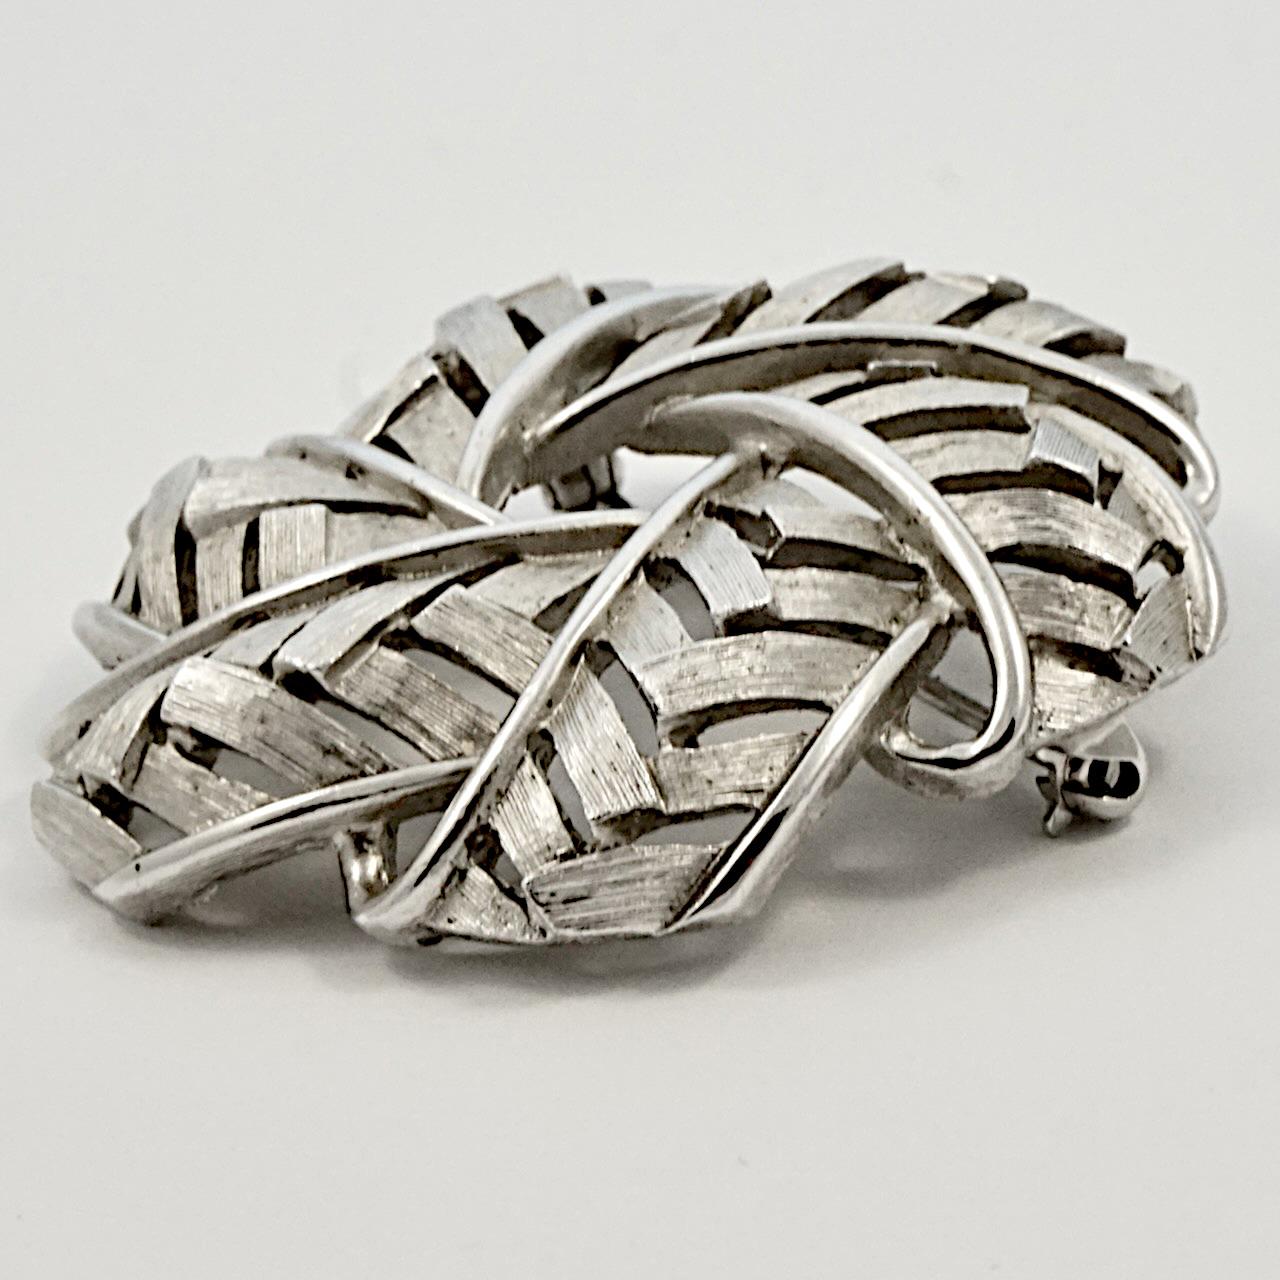 Trifari Silver Plated Brushed and Shiny Woven Brooch circa 1960s In Good Condition For Sale In London, GB